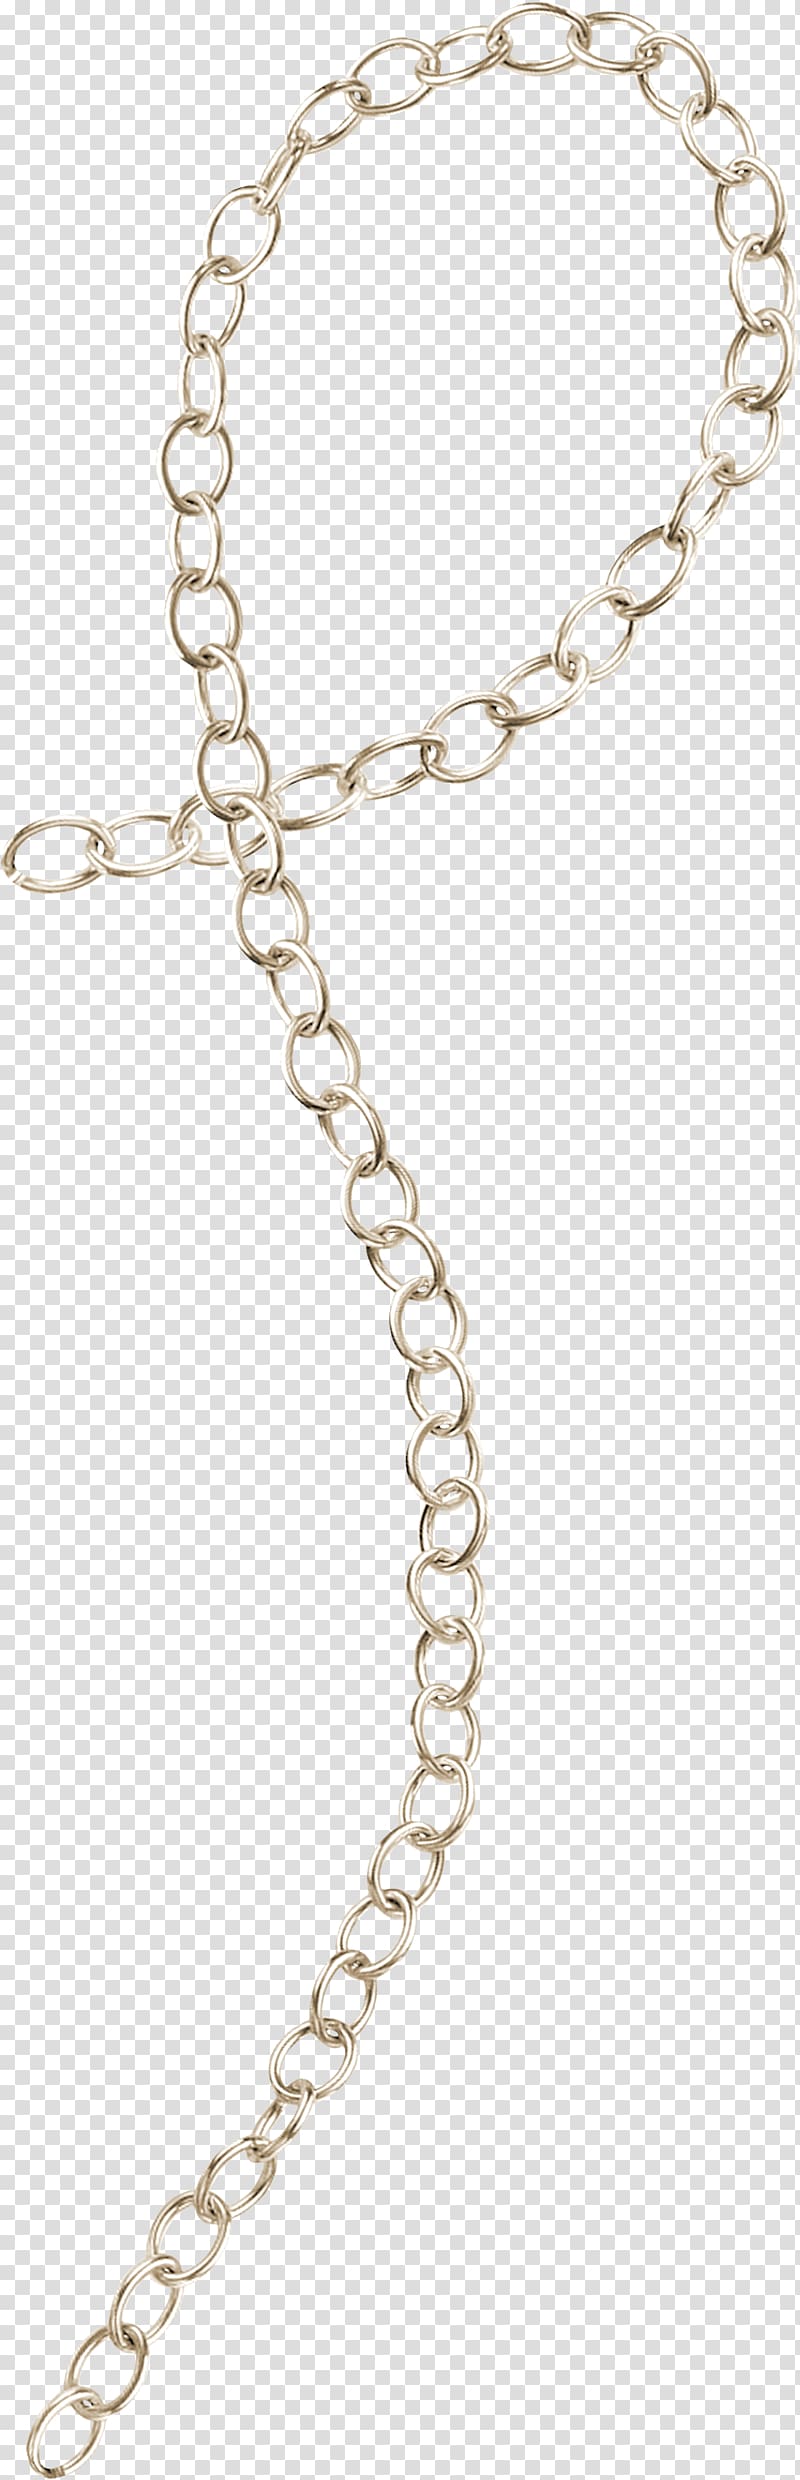 Chain Jewellery Necklace , anastasia transparent background PNG clipart ...